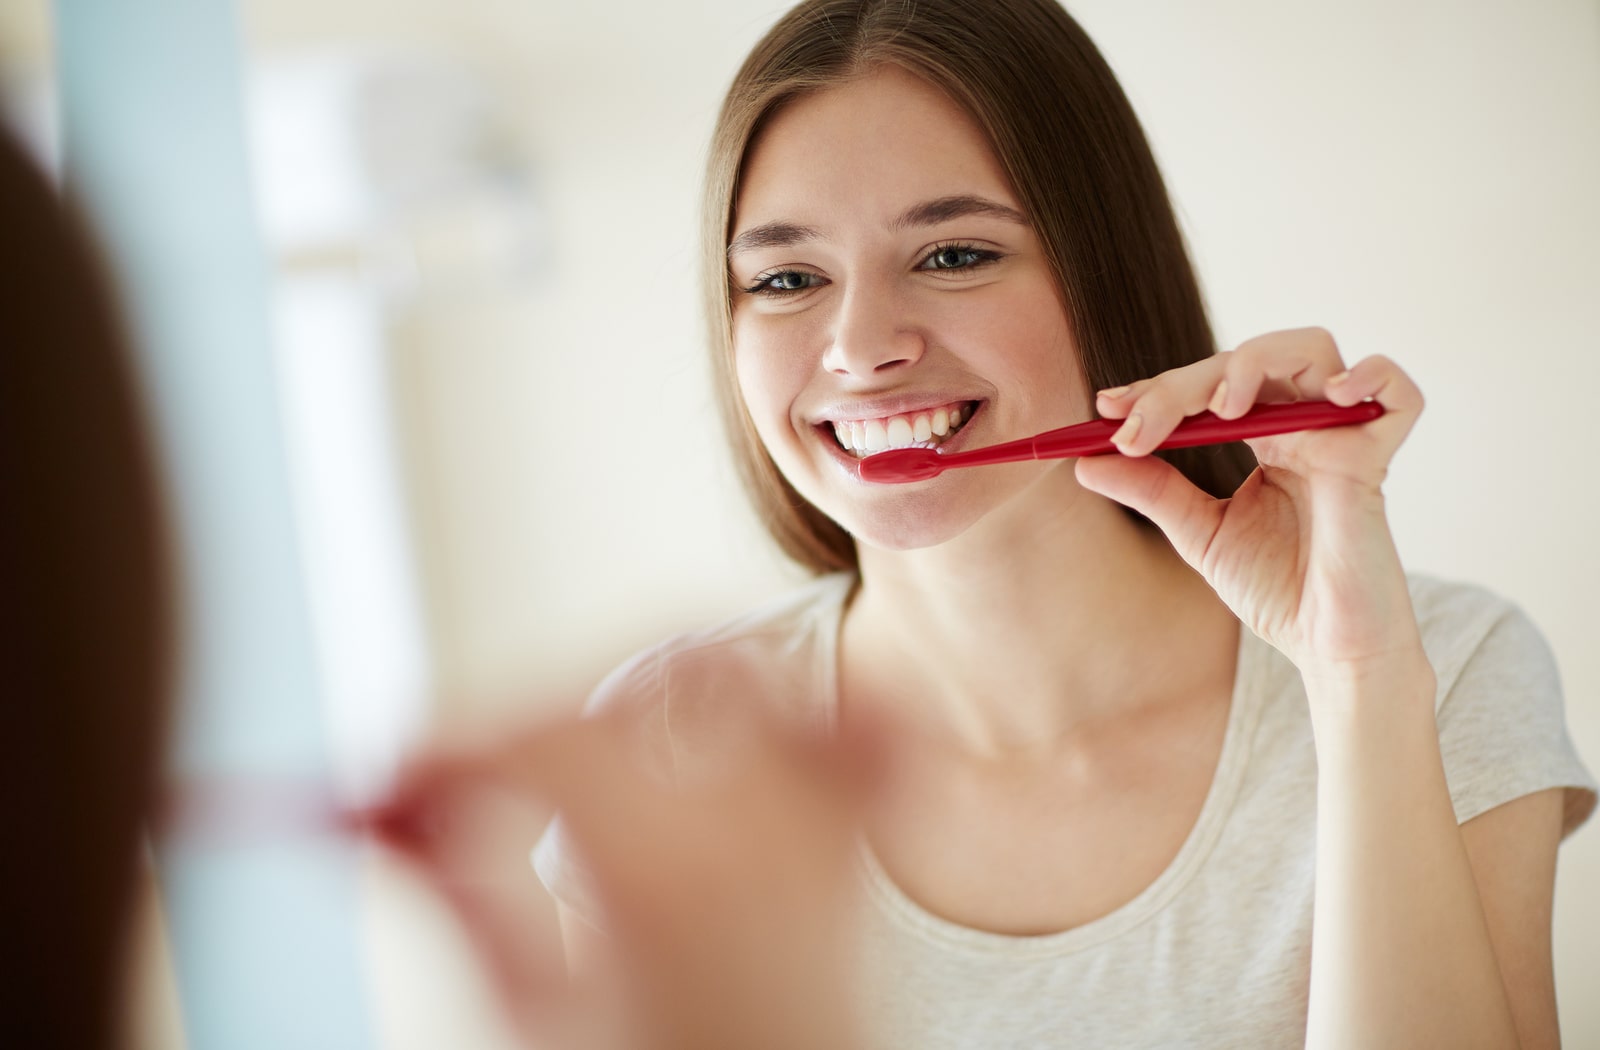 A young woman using a toothbrush to brush her teeth, while looking at herself in the mirror